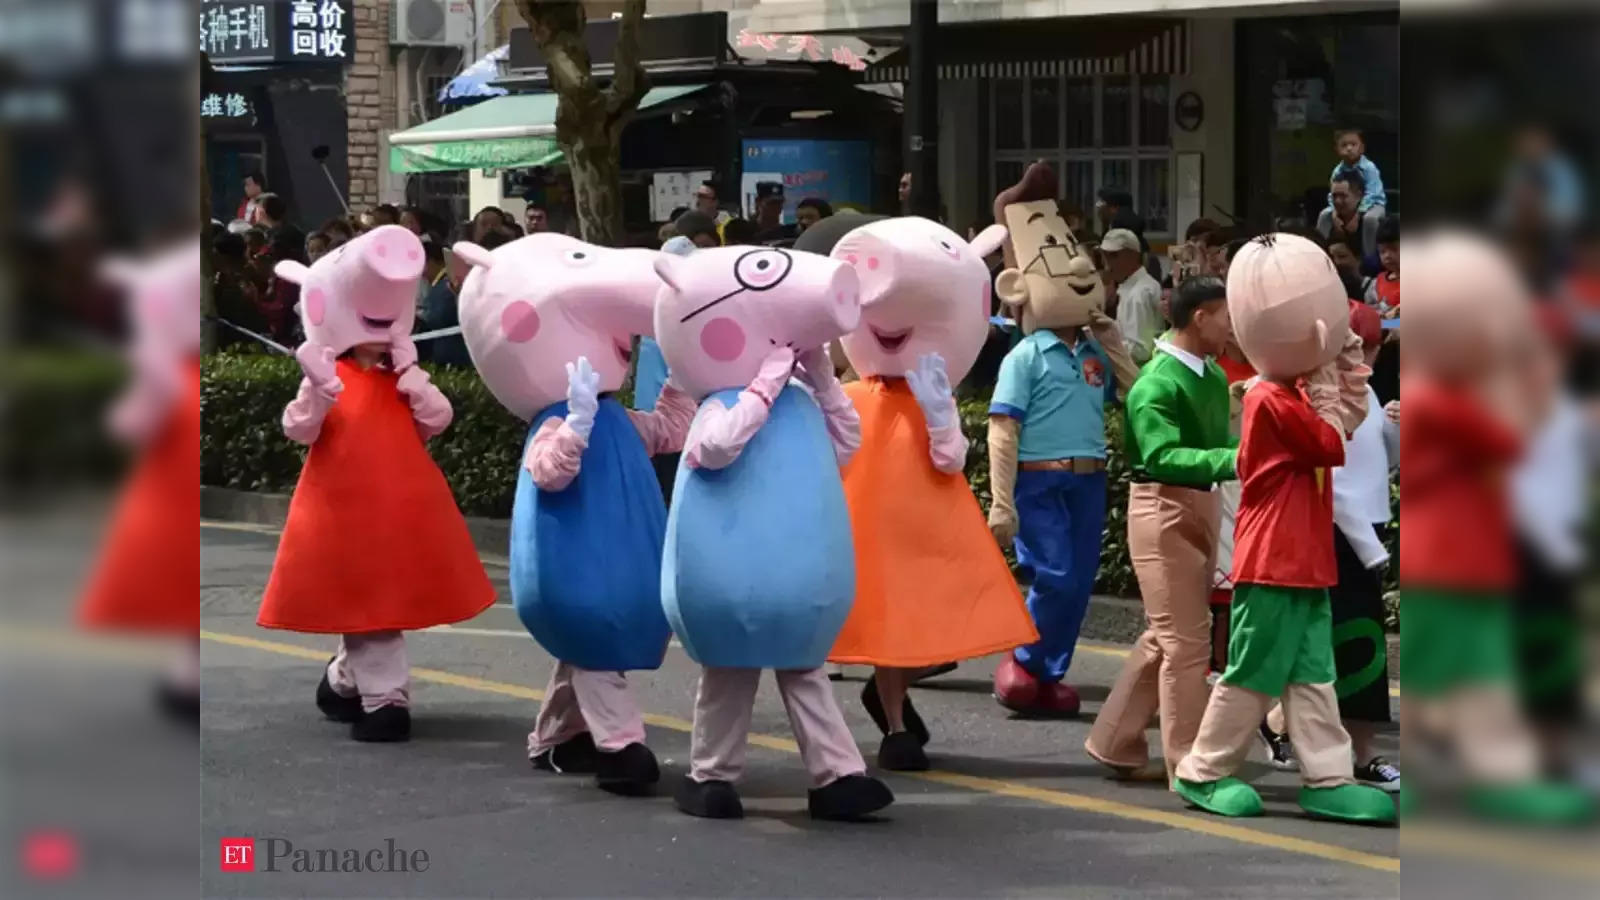 Peppa Pig: First same-sex couple for children's show